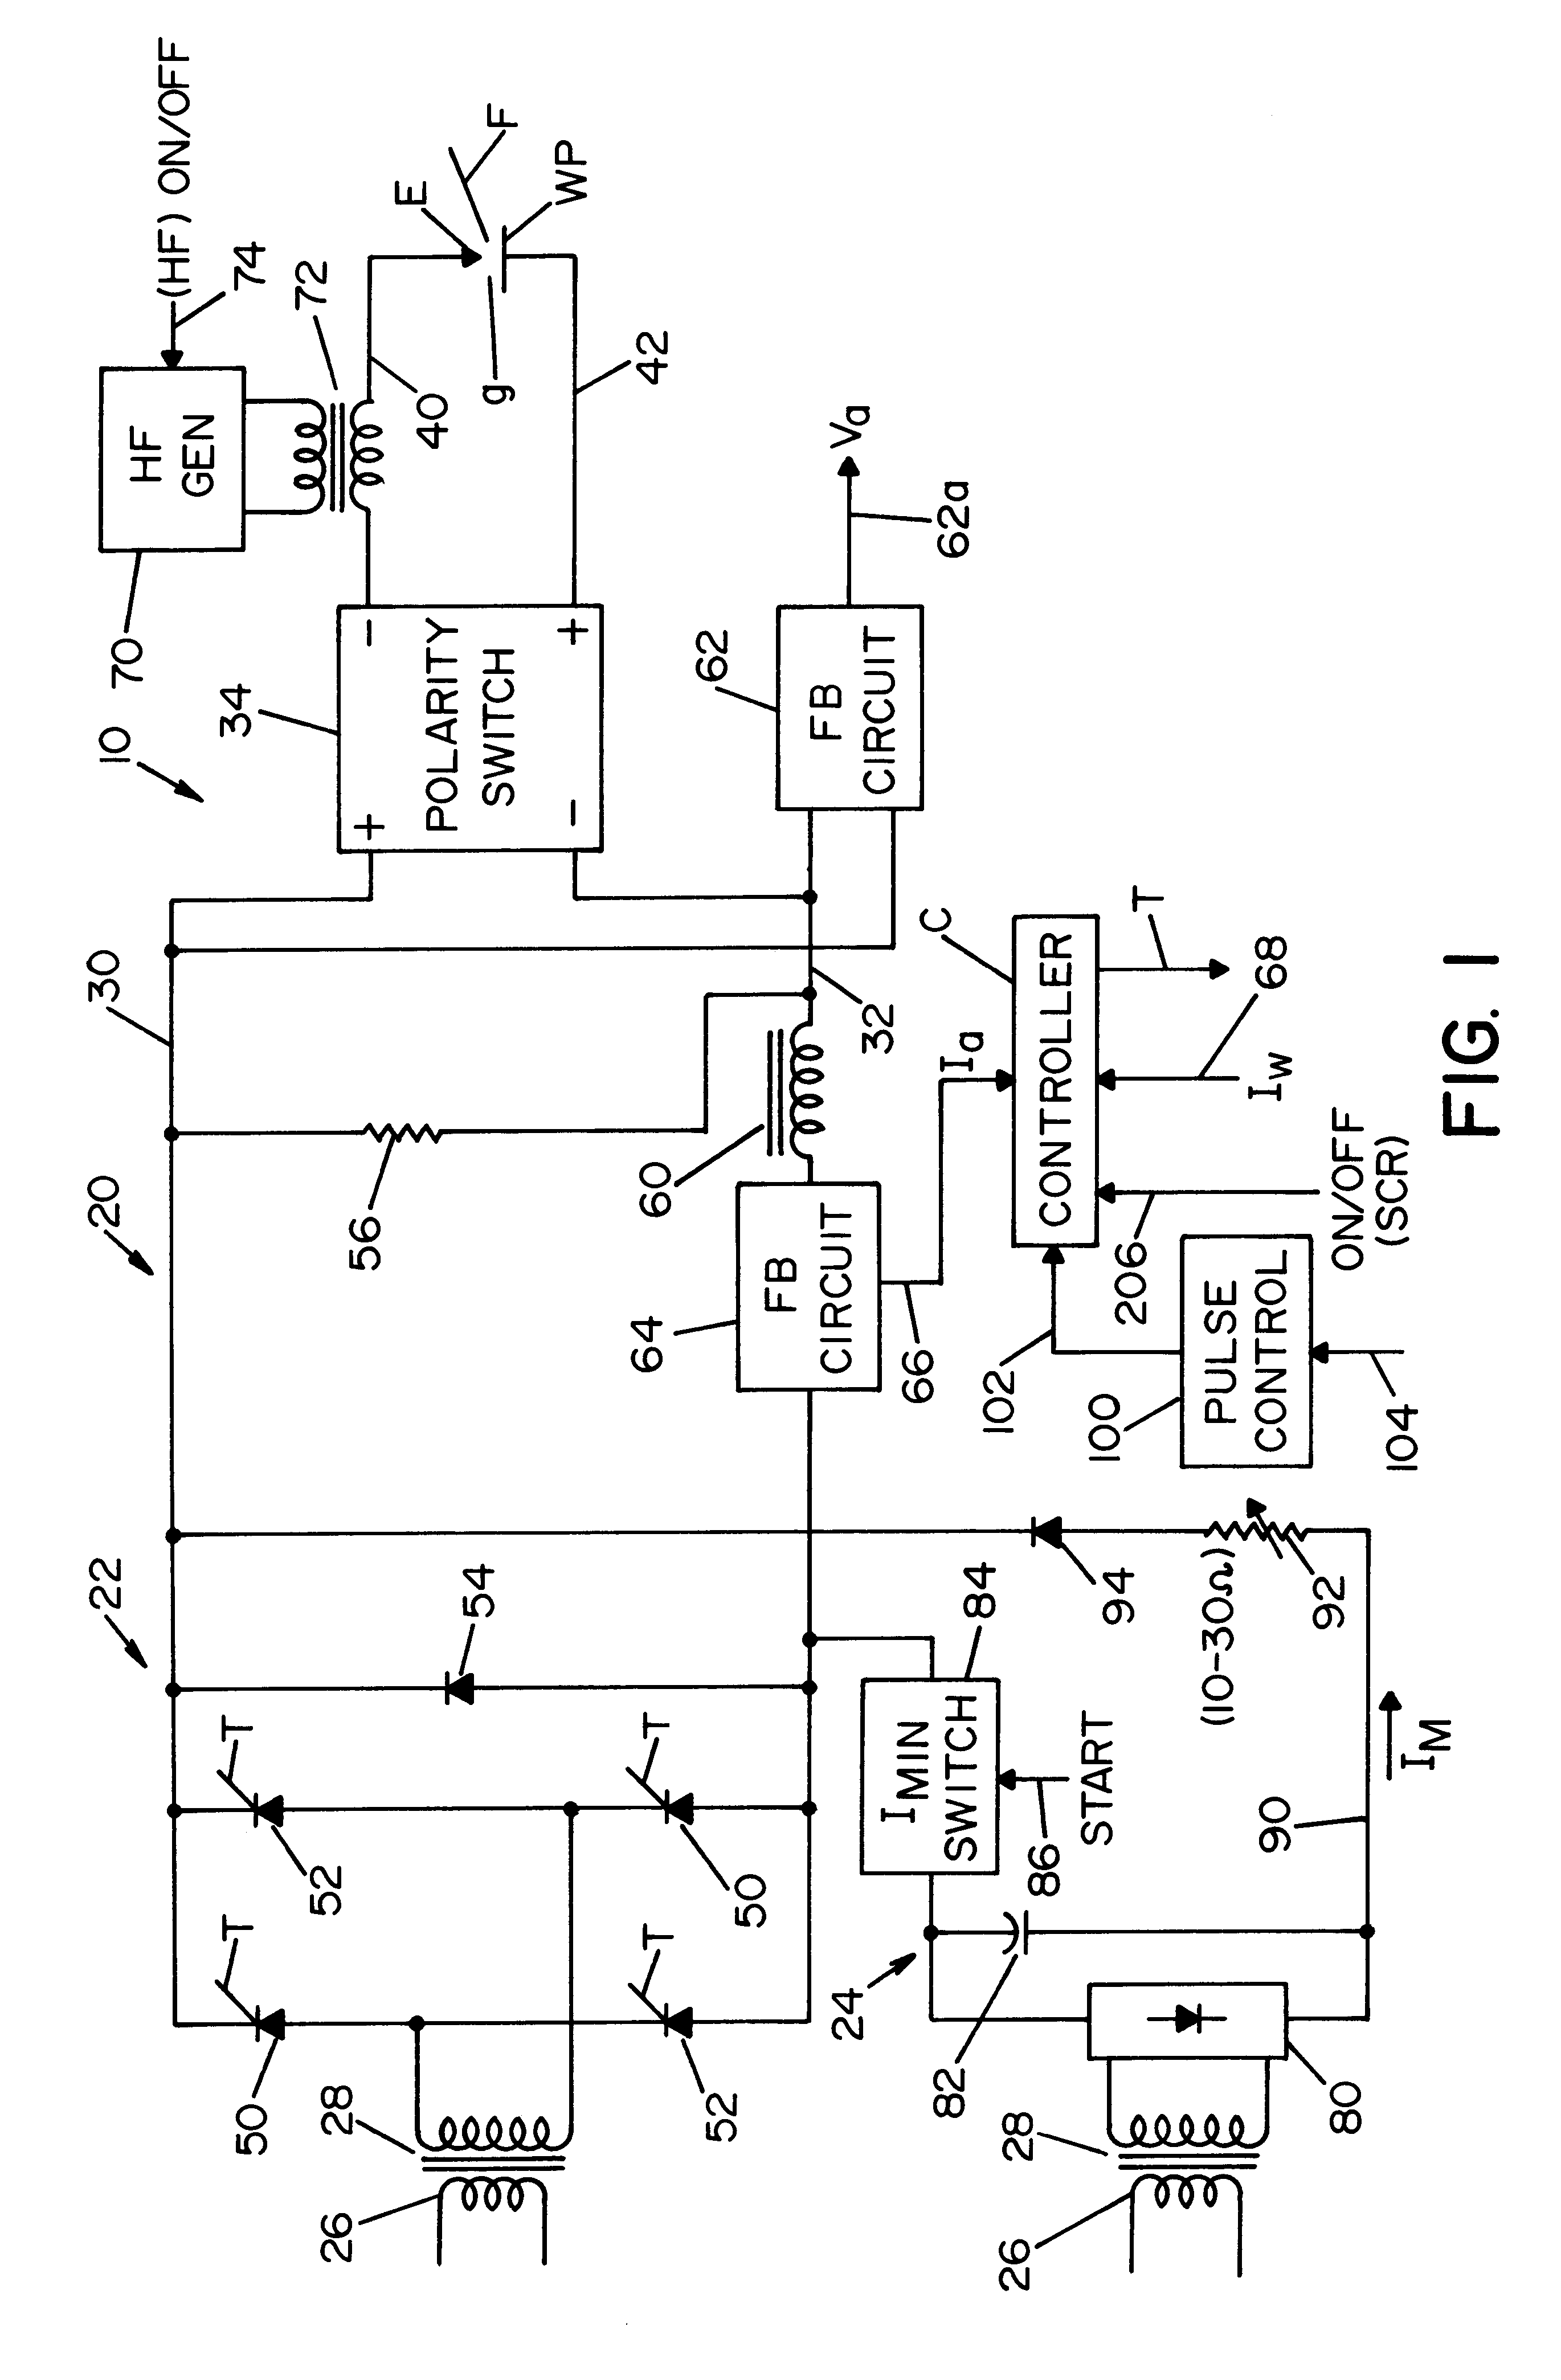 Starting and welding device for DC TIG welder and method of operating same